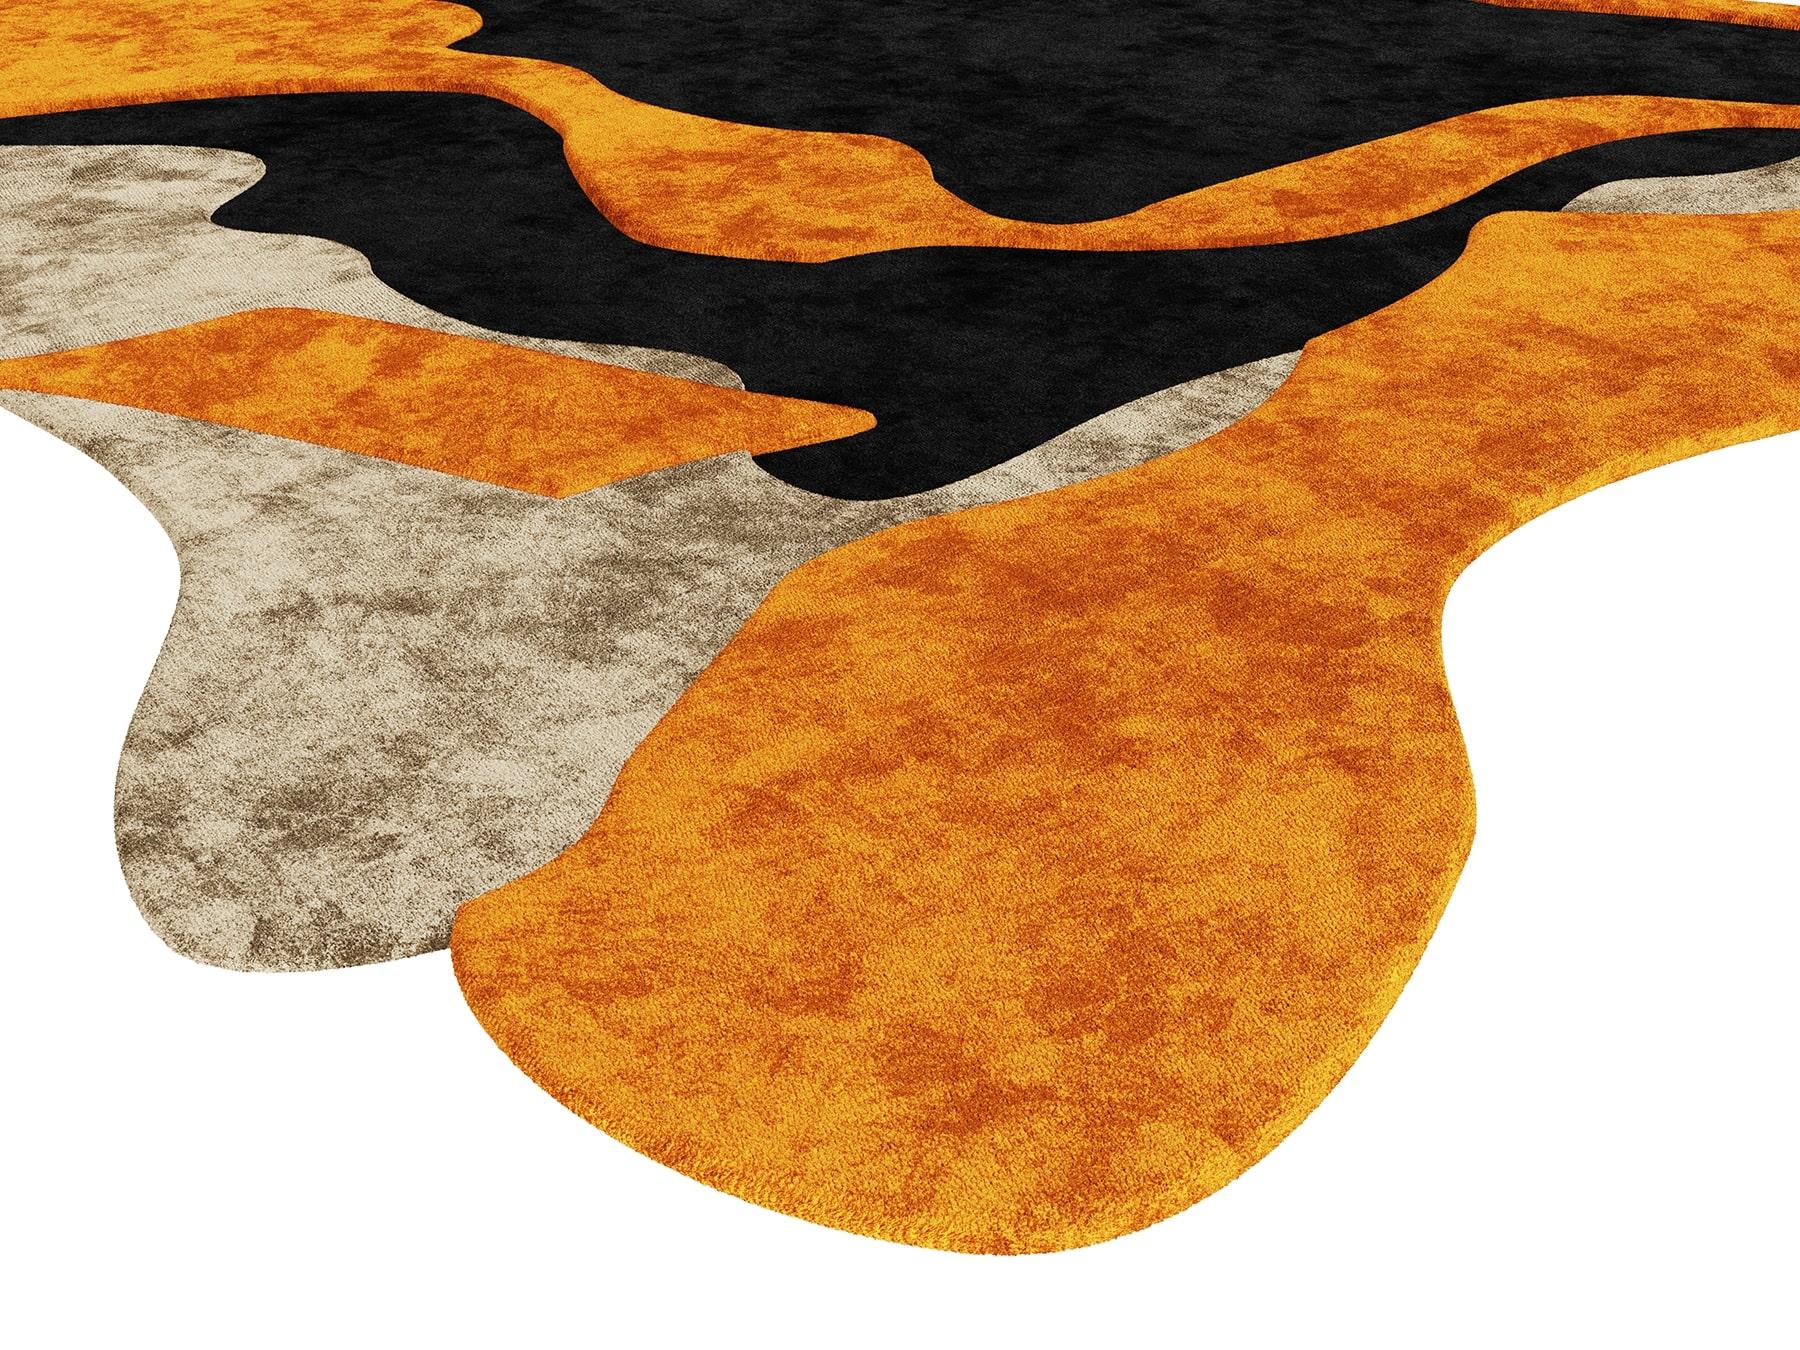 Tapis Shaped #043 also known as Piano Rug is a modern piece by HOMMÉS Studio x TAPIS Studio. It evokes a powerful combination of colors and shapes that collide in the same dimension. An abstract design is a bold choice for a modern-living project.